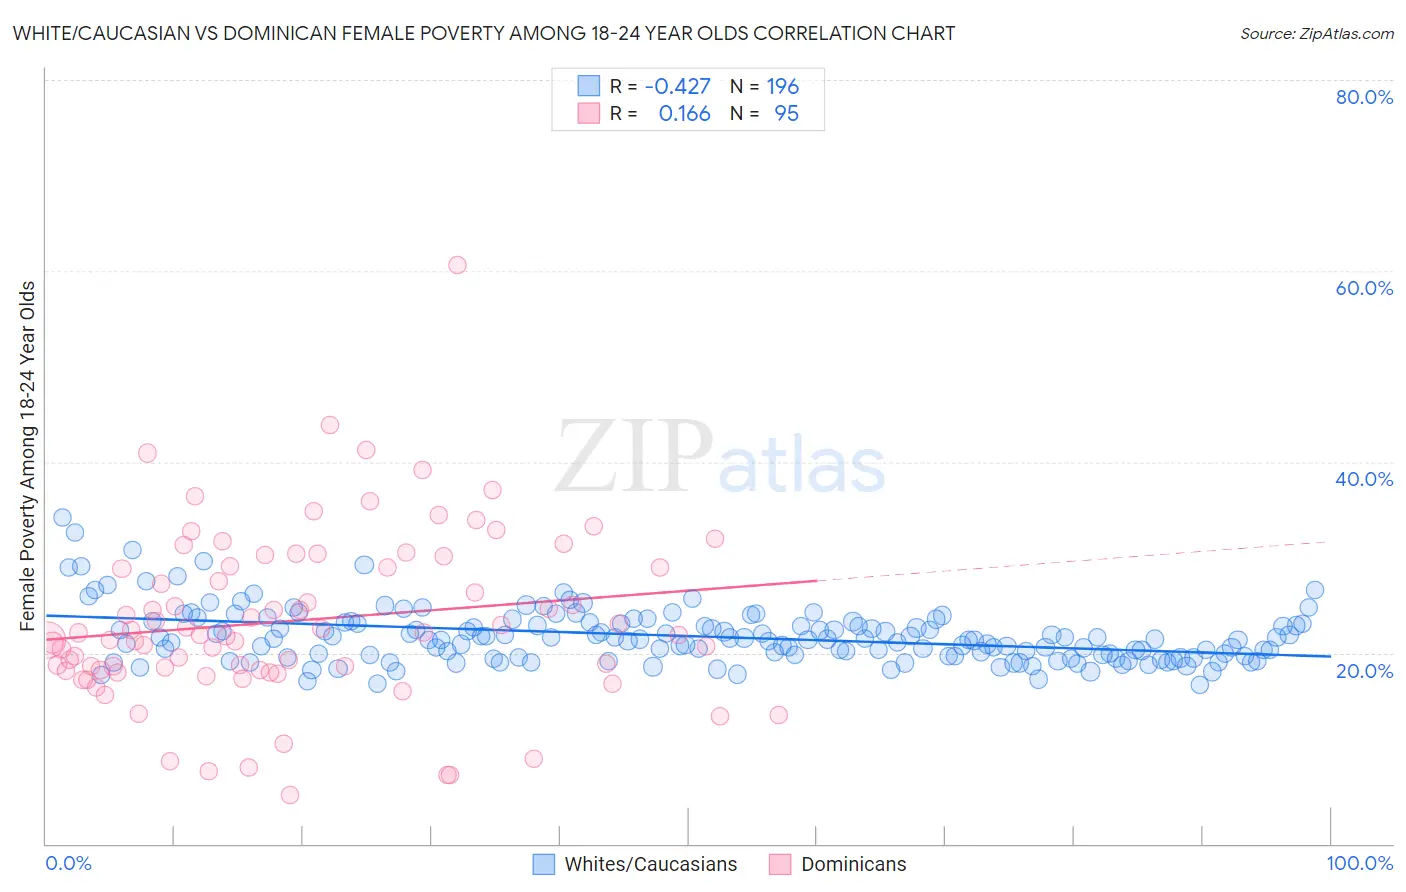 White/Caucasian vs Dominican Female Poverty Among 18-24 Year Olds